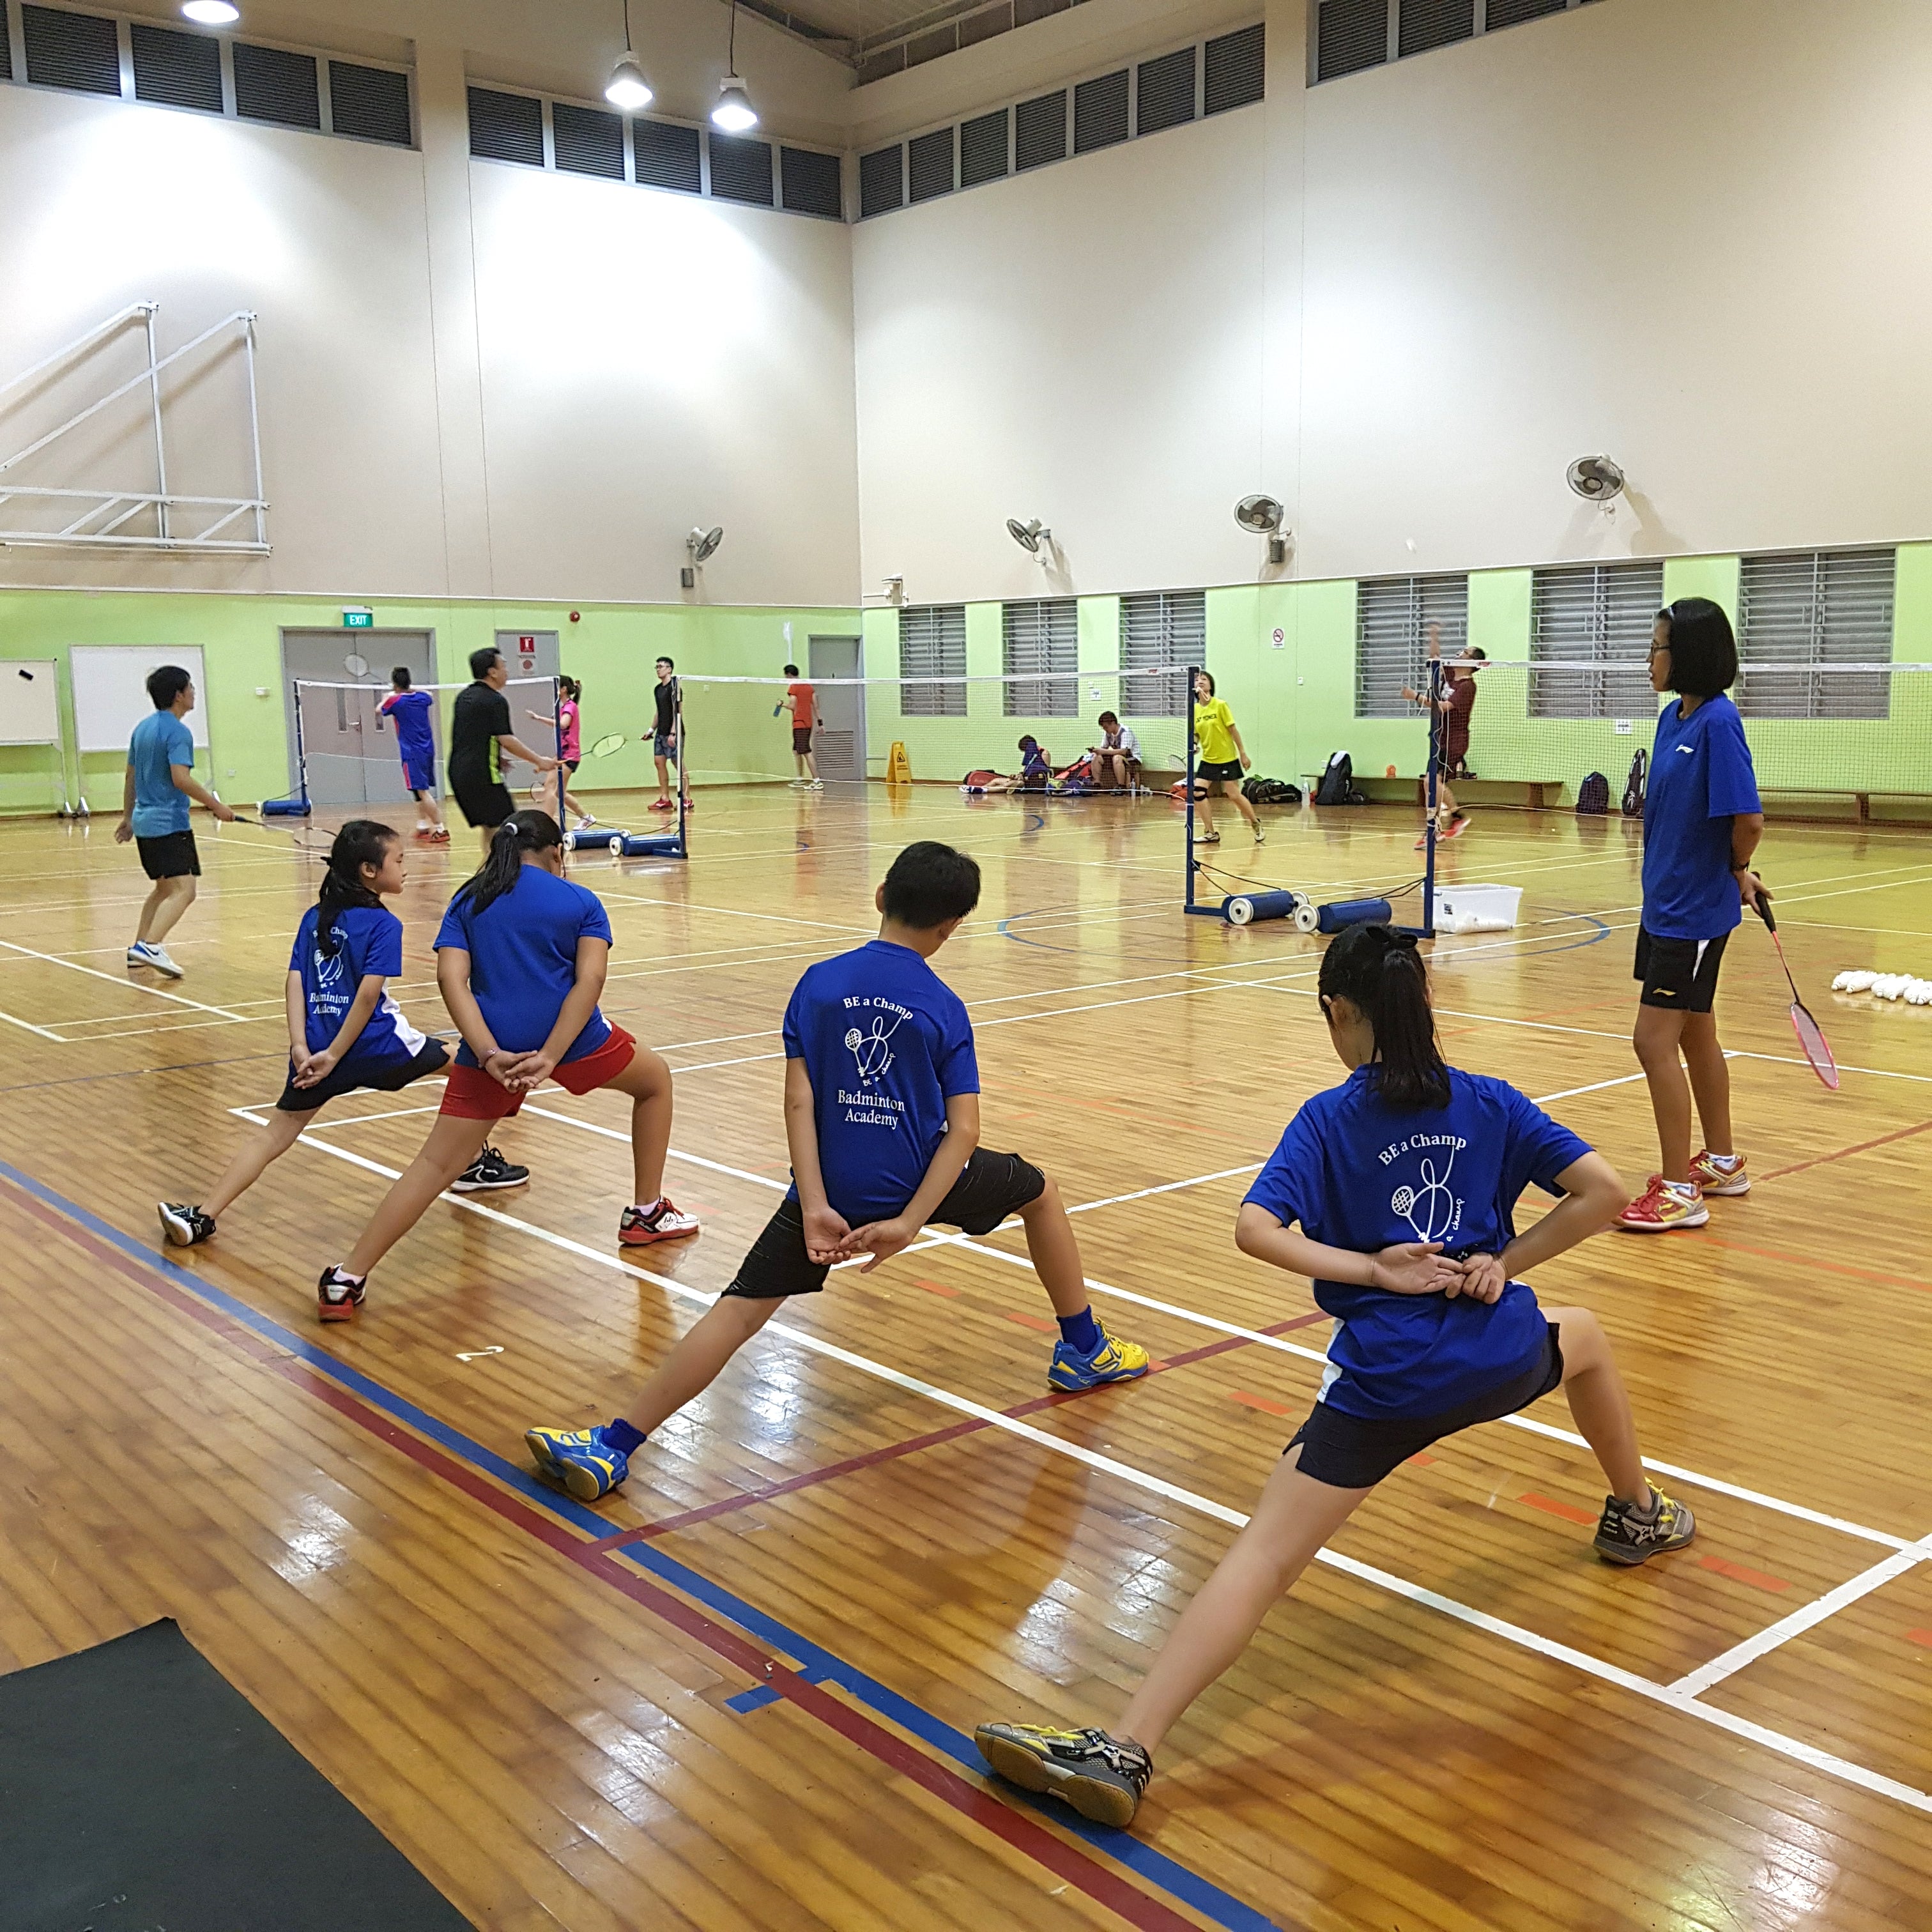 Be A Champ: Kid's Badminton Class x 12 (1 Term) at $600!